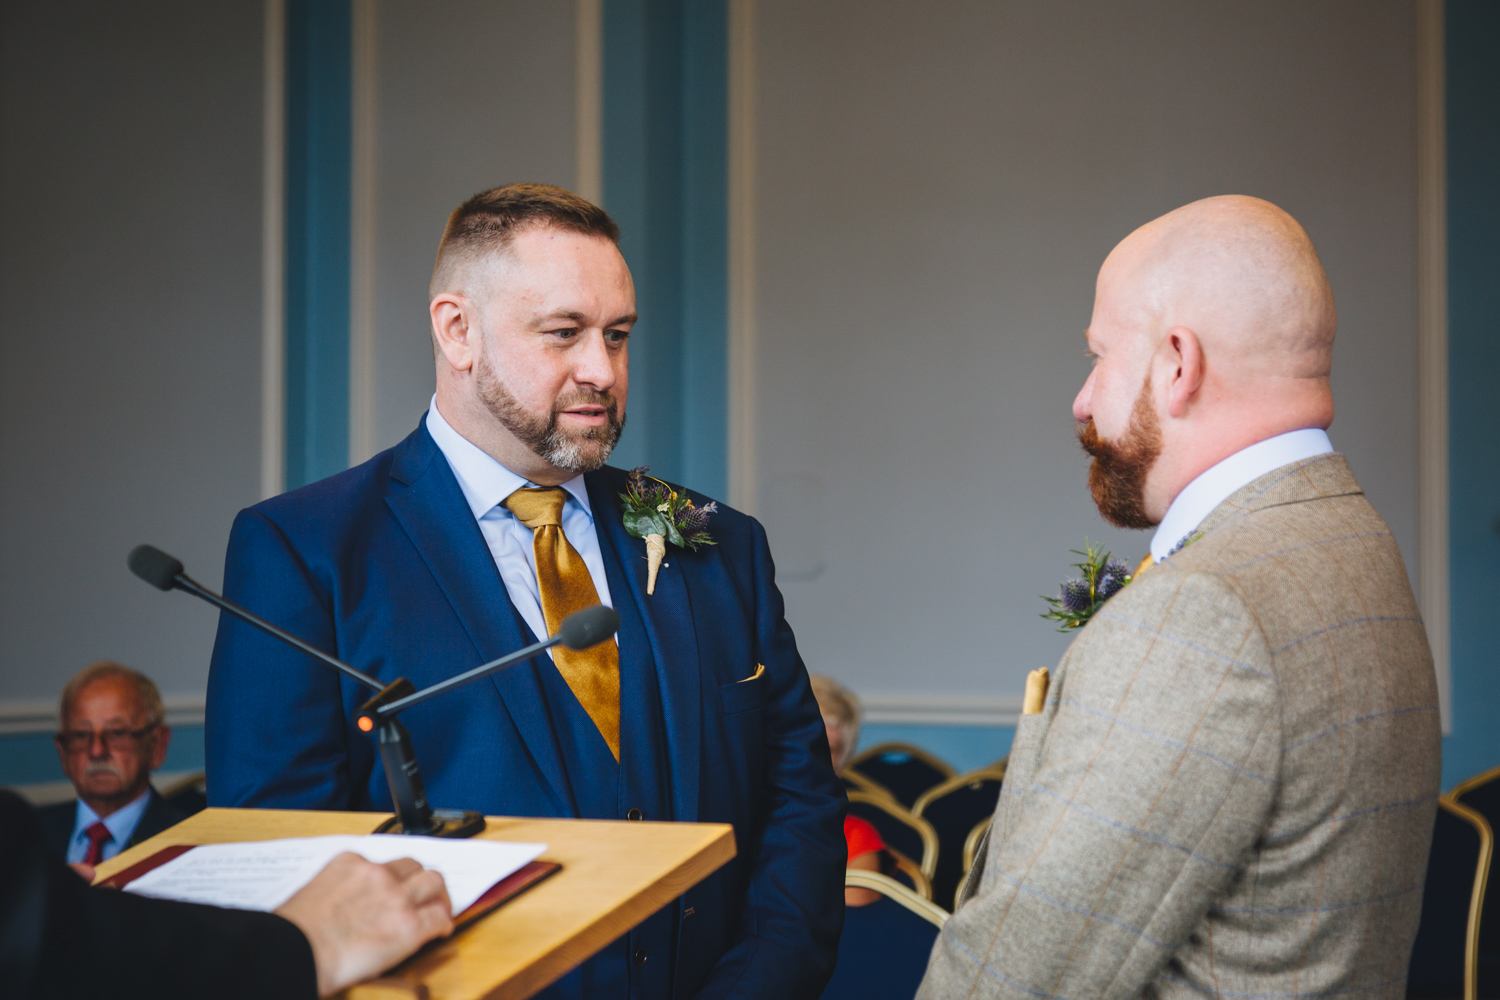  wedding promises at gay wedding ceremony at cardiff city hall with gay friendly south wales wedding photographer